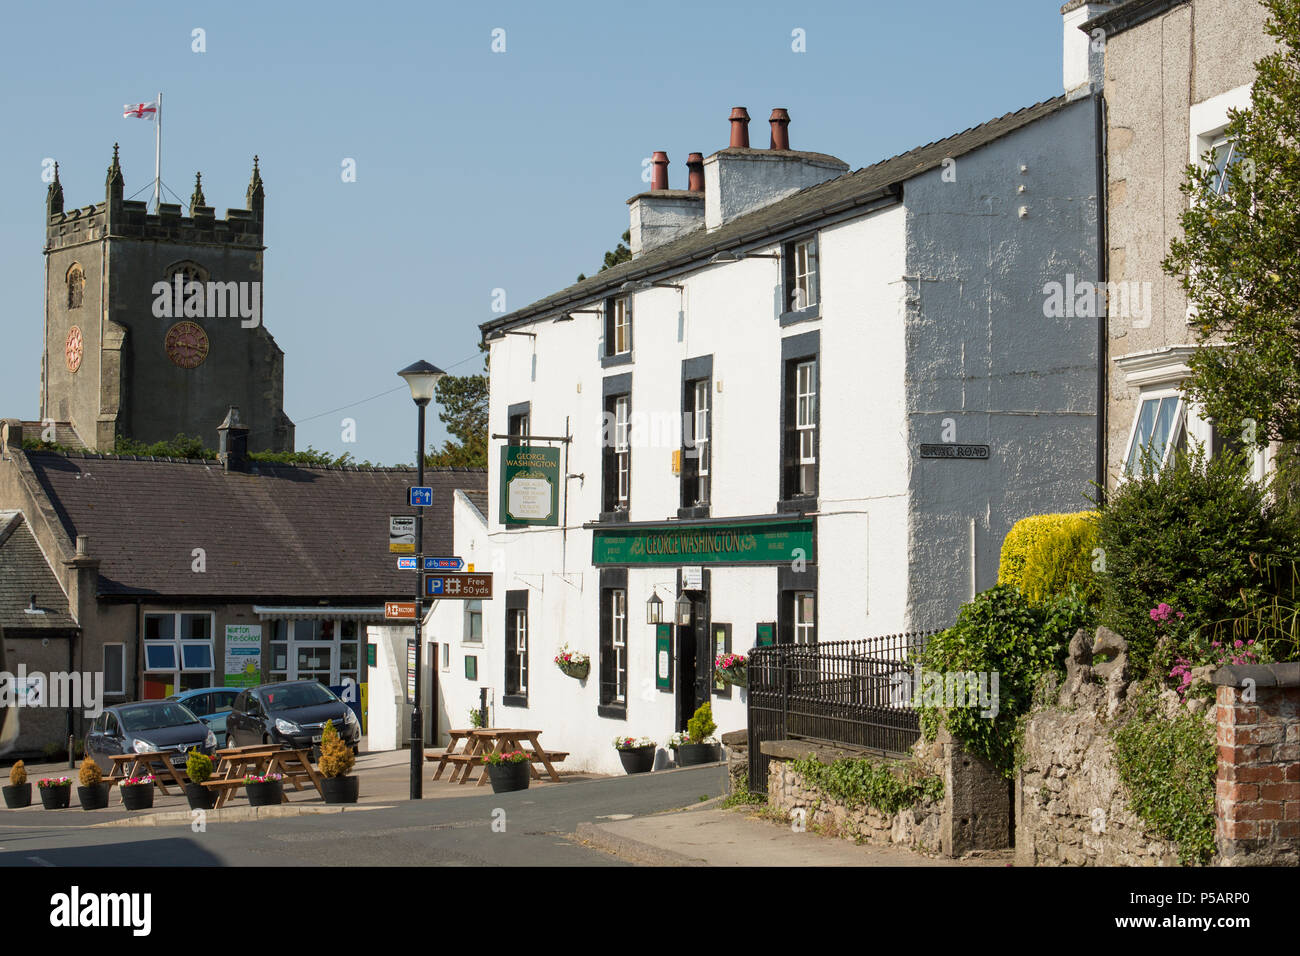 The George Washington Pub, formerly the Black Bull, in the village of Warton in Lancashire. The village of Warton was the birthplace of the medieval a Stock Photo